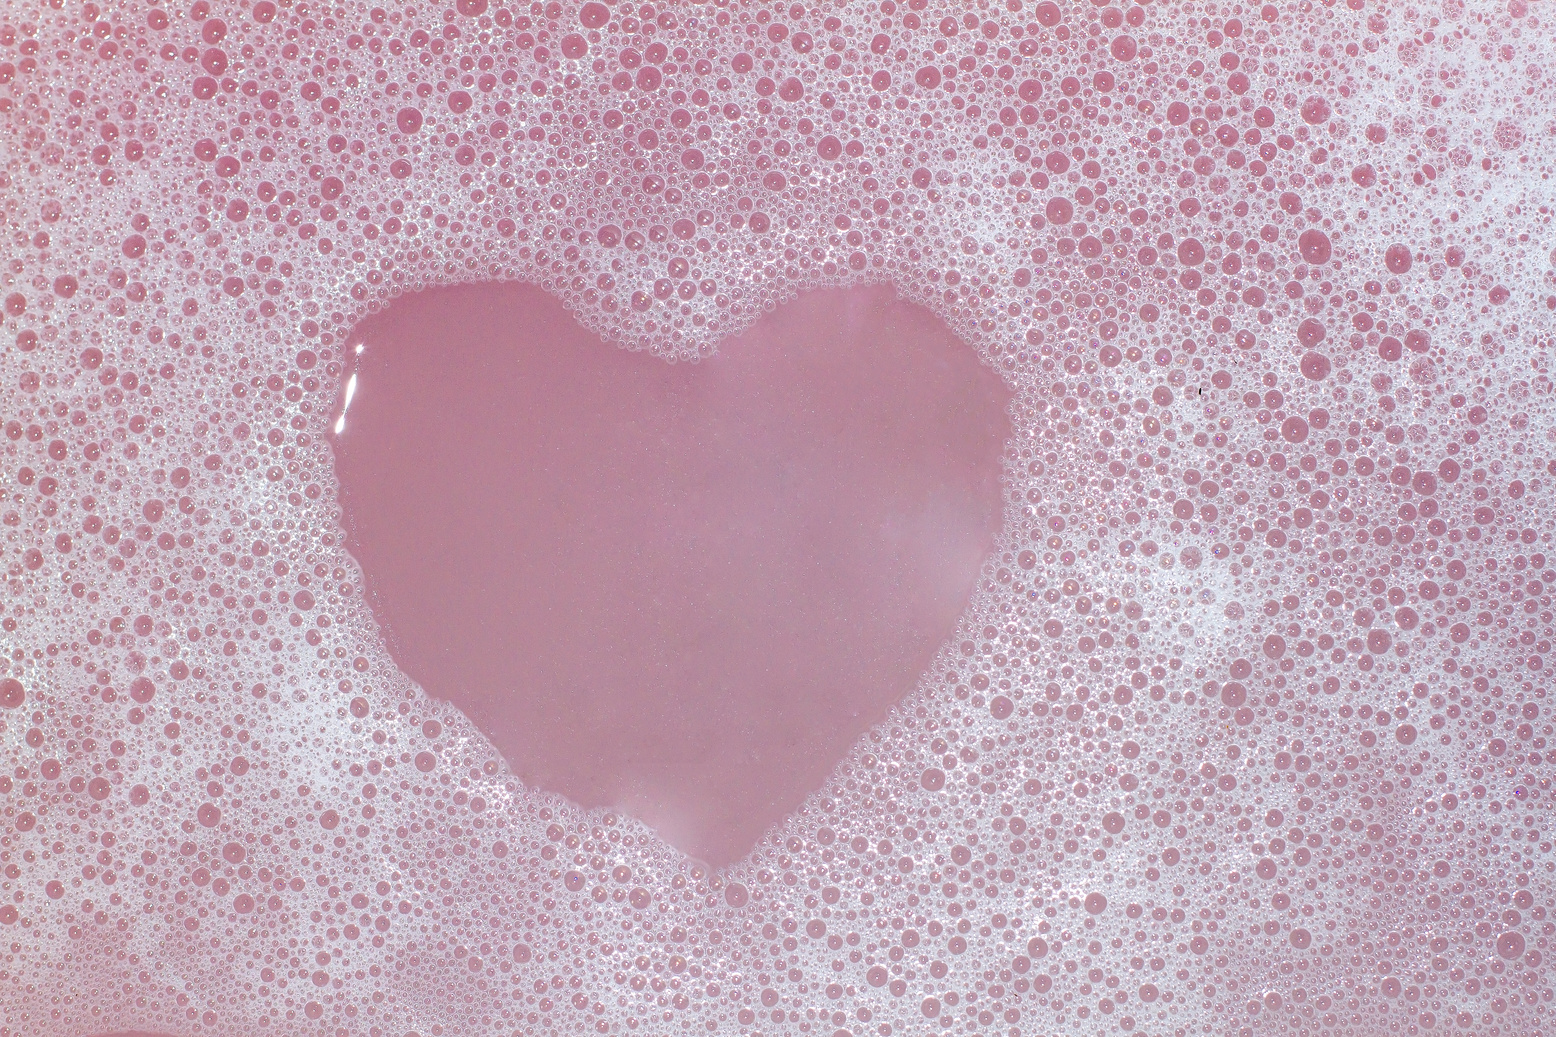 Heart Shaped Bubbles.Abstract, Foam bubbles white background. Detergent